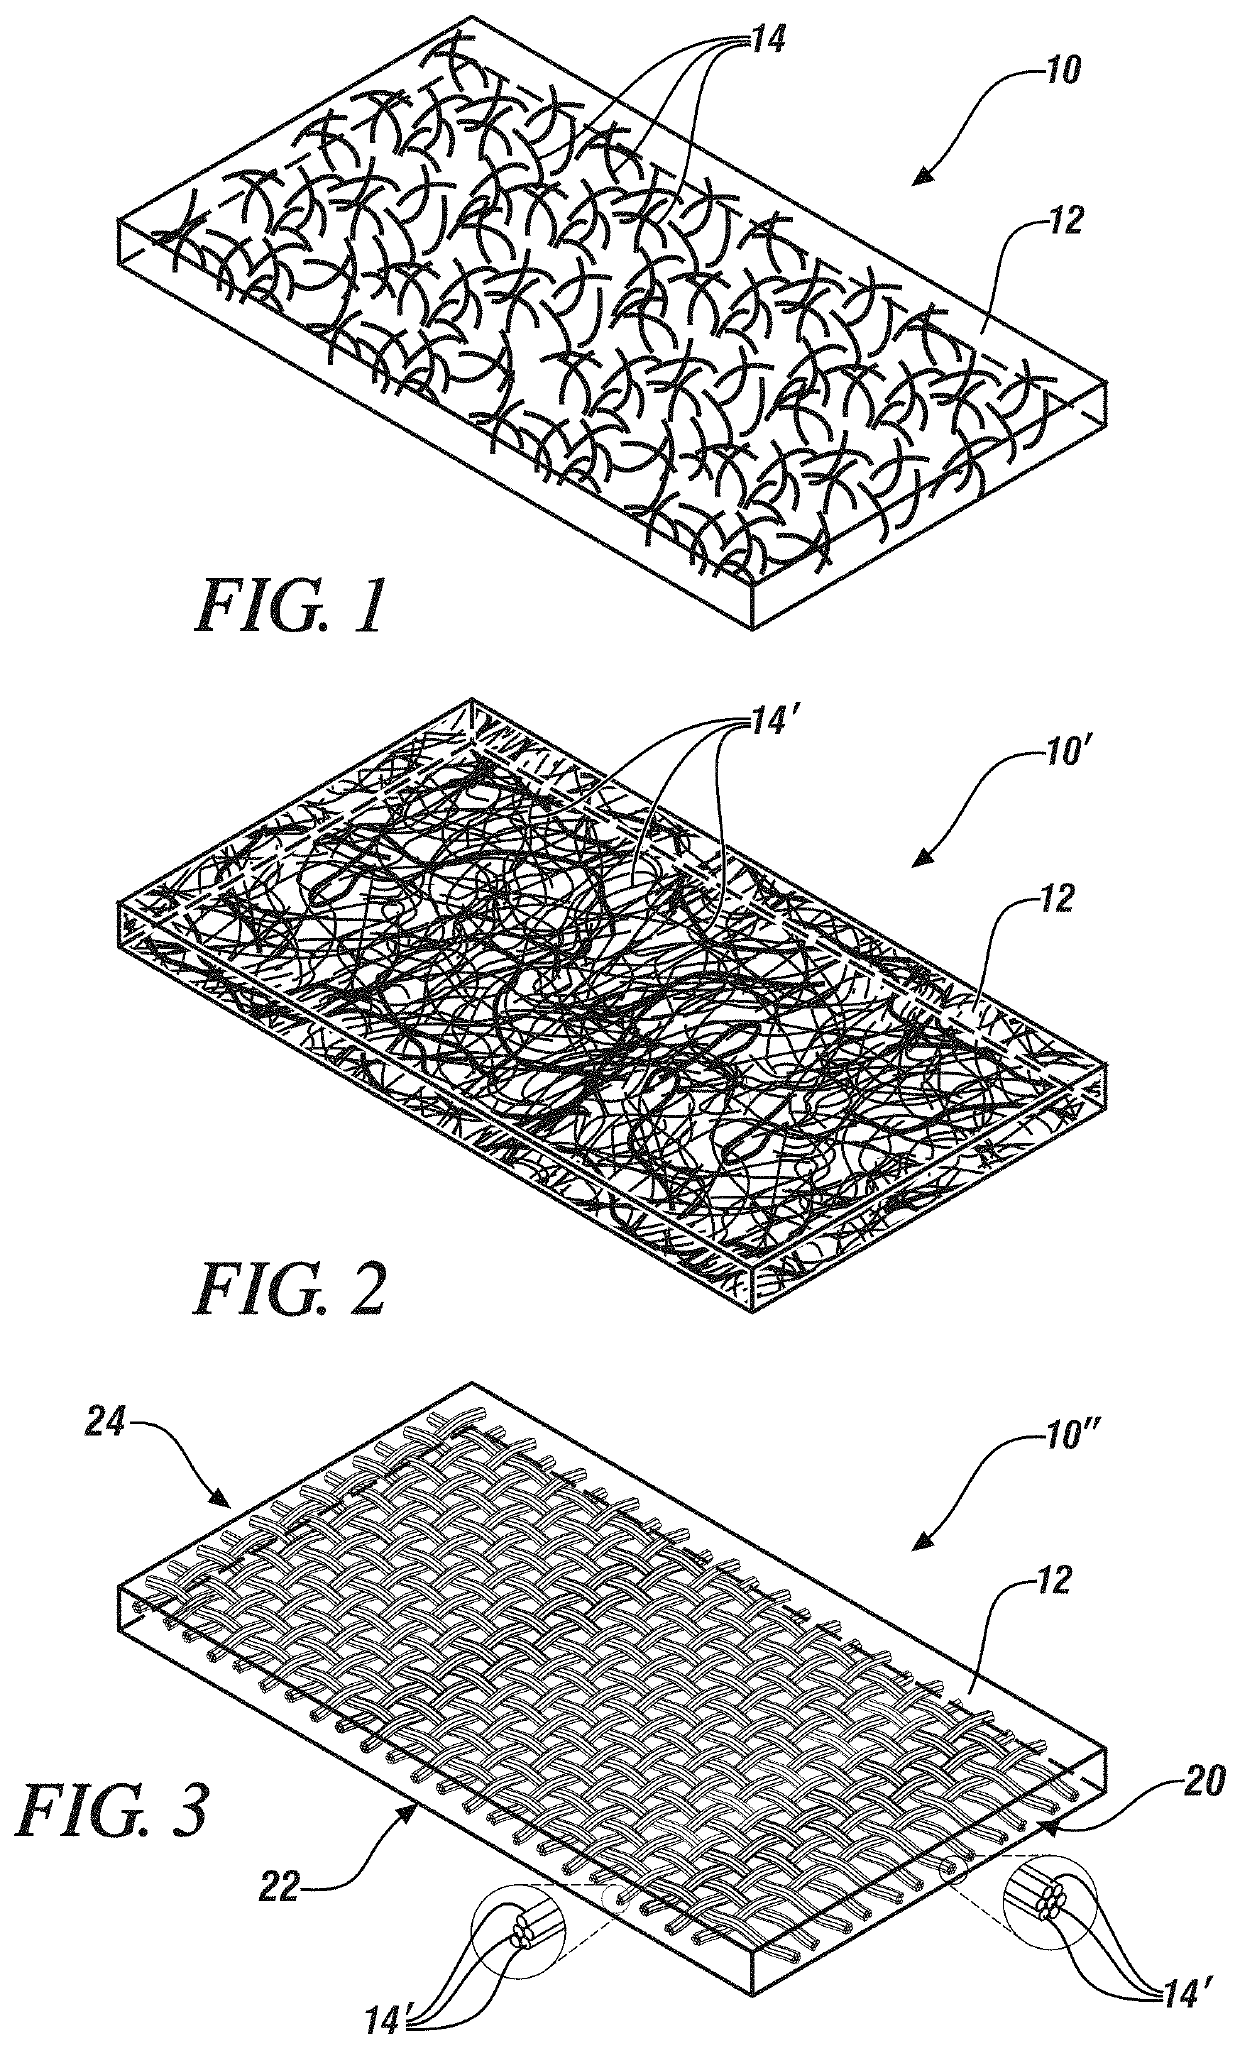 Ionically-conductive reinforced glass ceramic separators/solid electrolytes